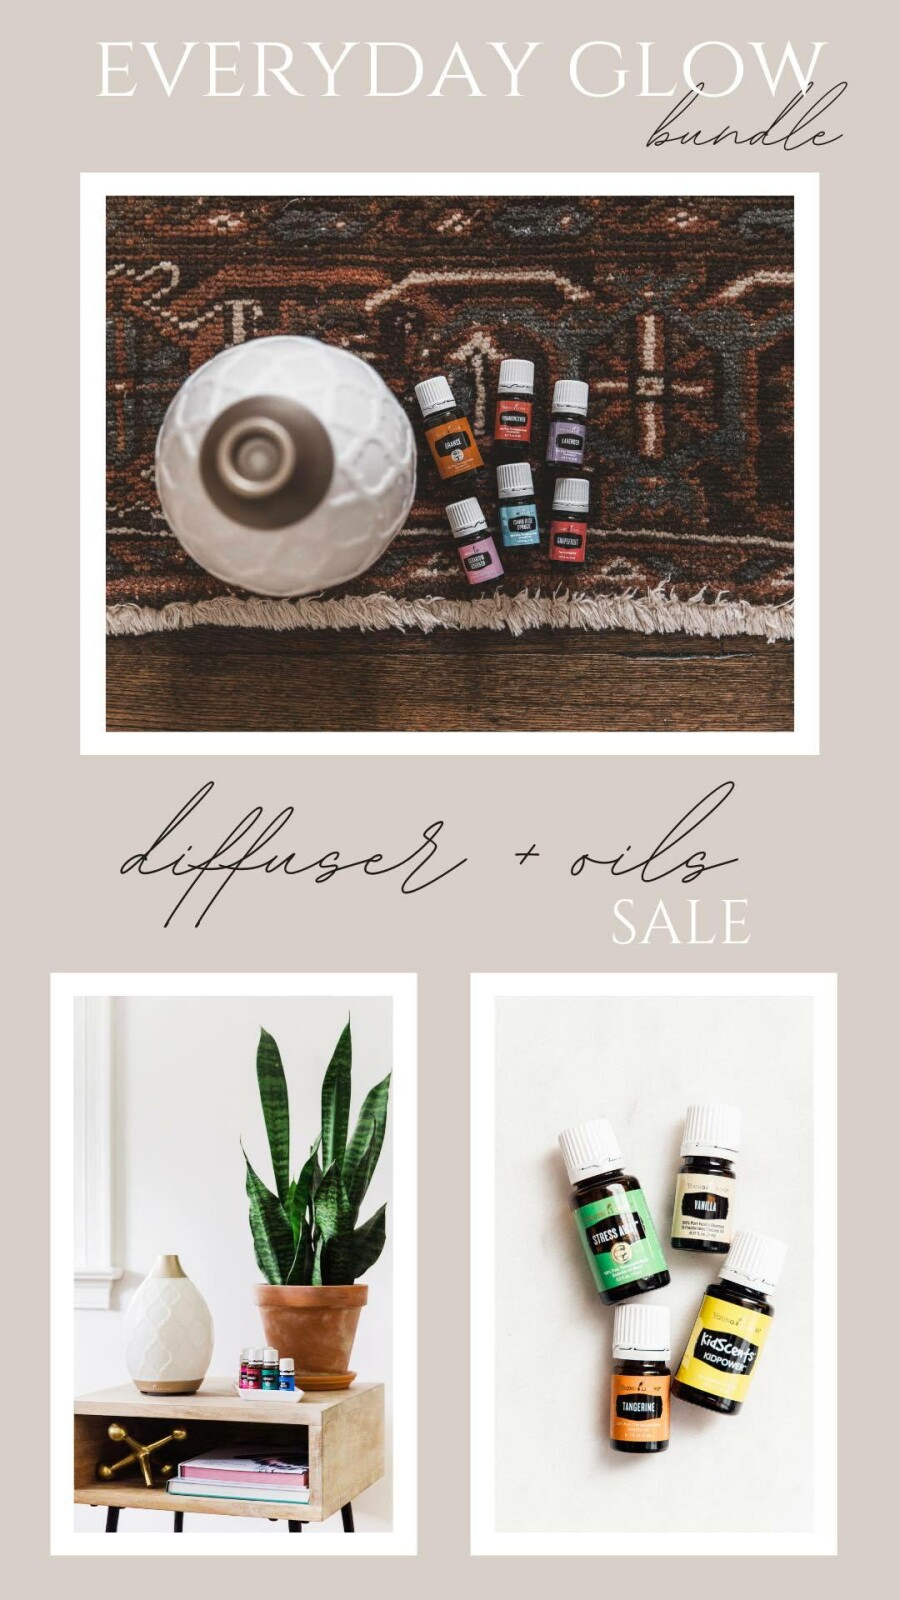 AMAZING New Bundle PLUS 20% Off Select Essential Oils PLUS Diffuser Sale!  This week only!